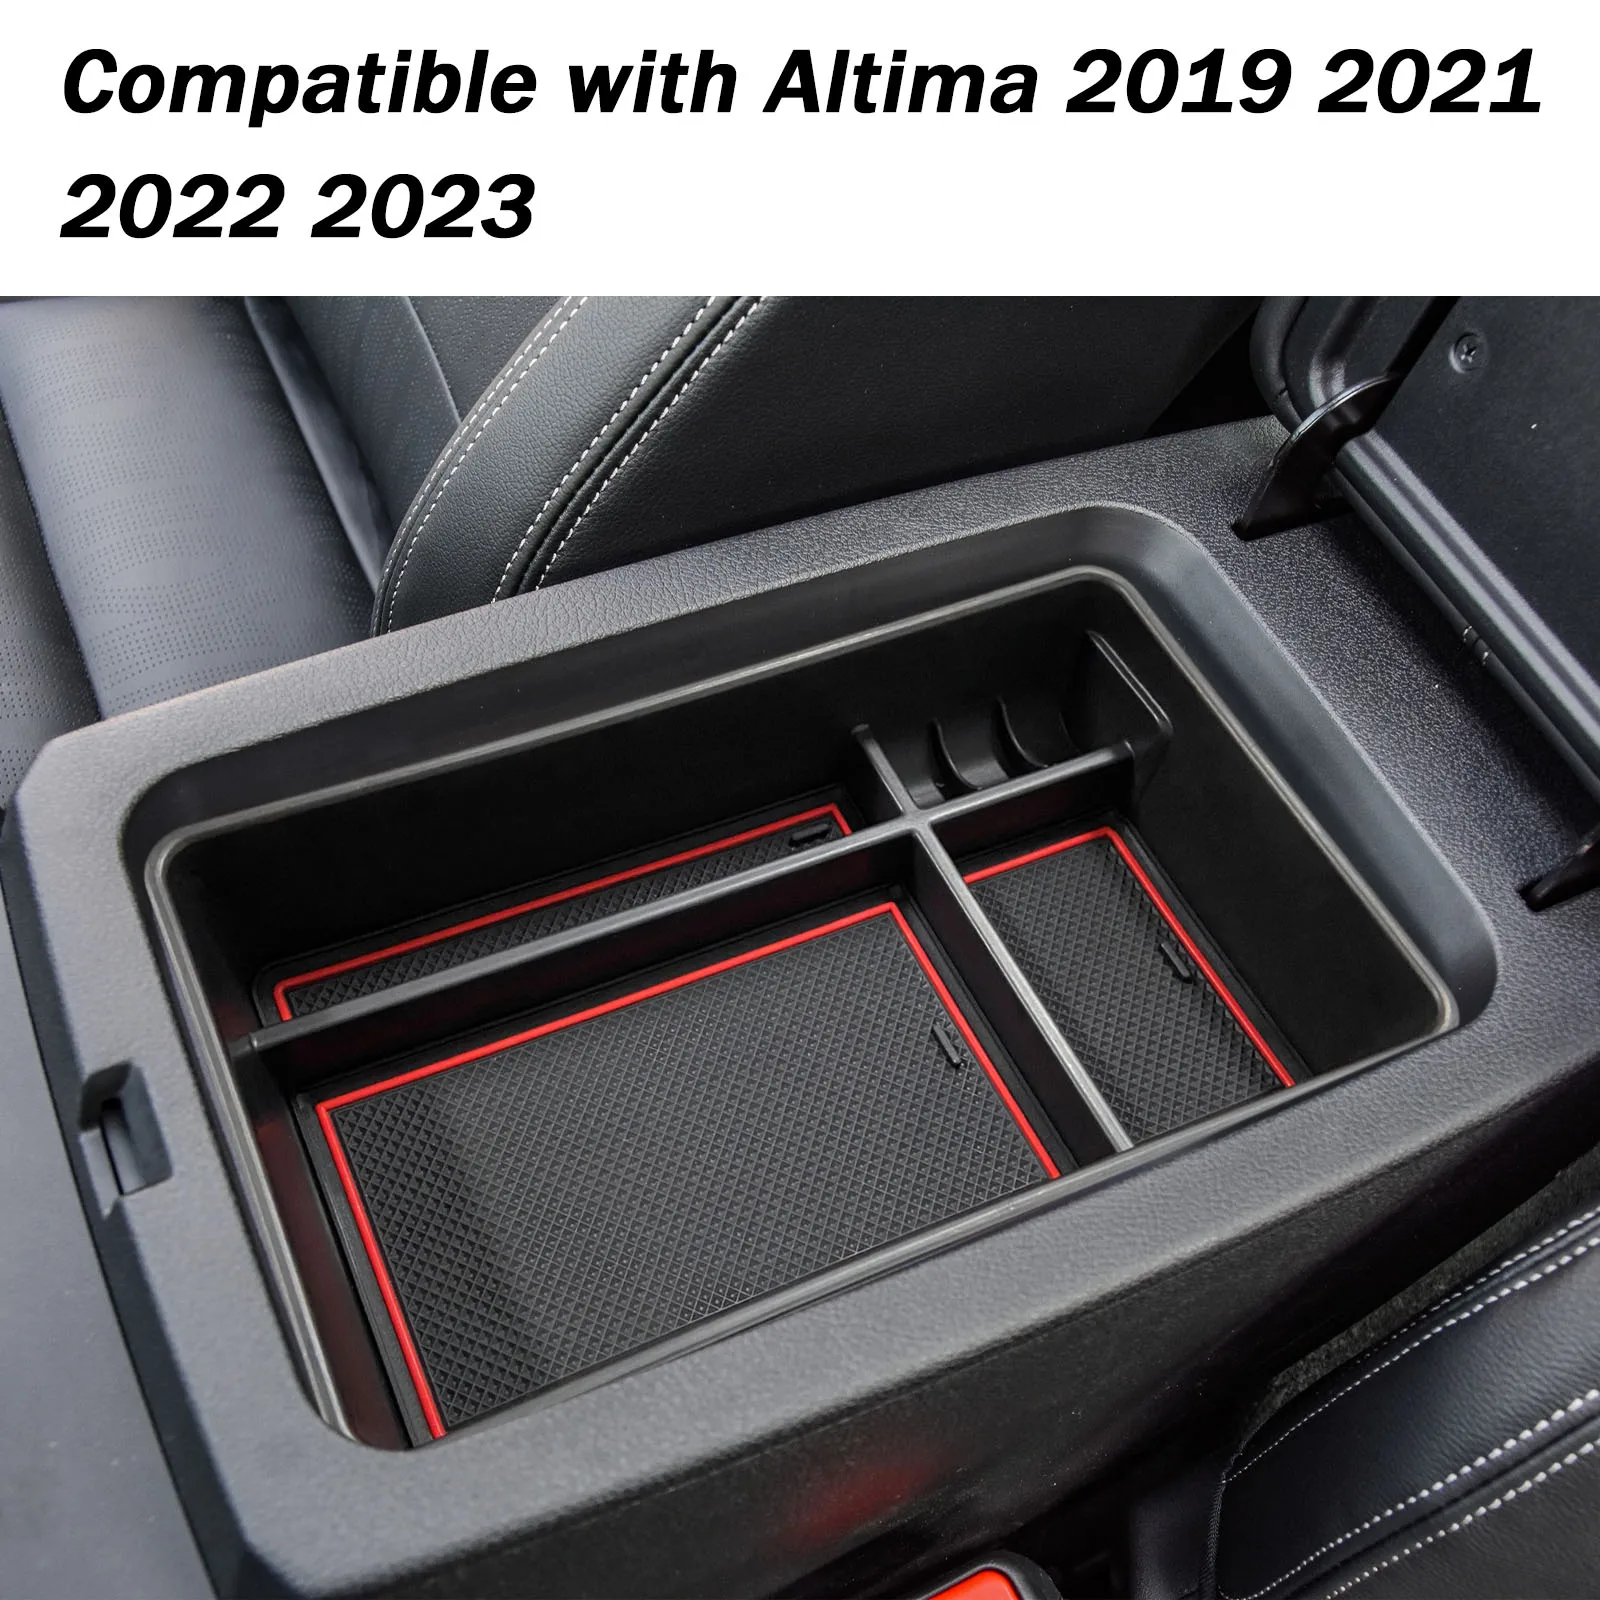 Center Console Tray Organizer For Nissan Altima 2019 2020 2021 2022 2023 Accessories Container Stowing Glove Box Pallet Holder center console tray organizer for nissan altima 2019 2020 2021 2022 2023 accessories container stowing glove box pallet holder